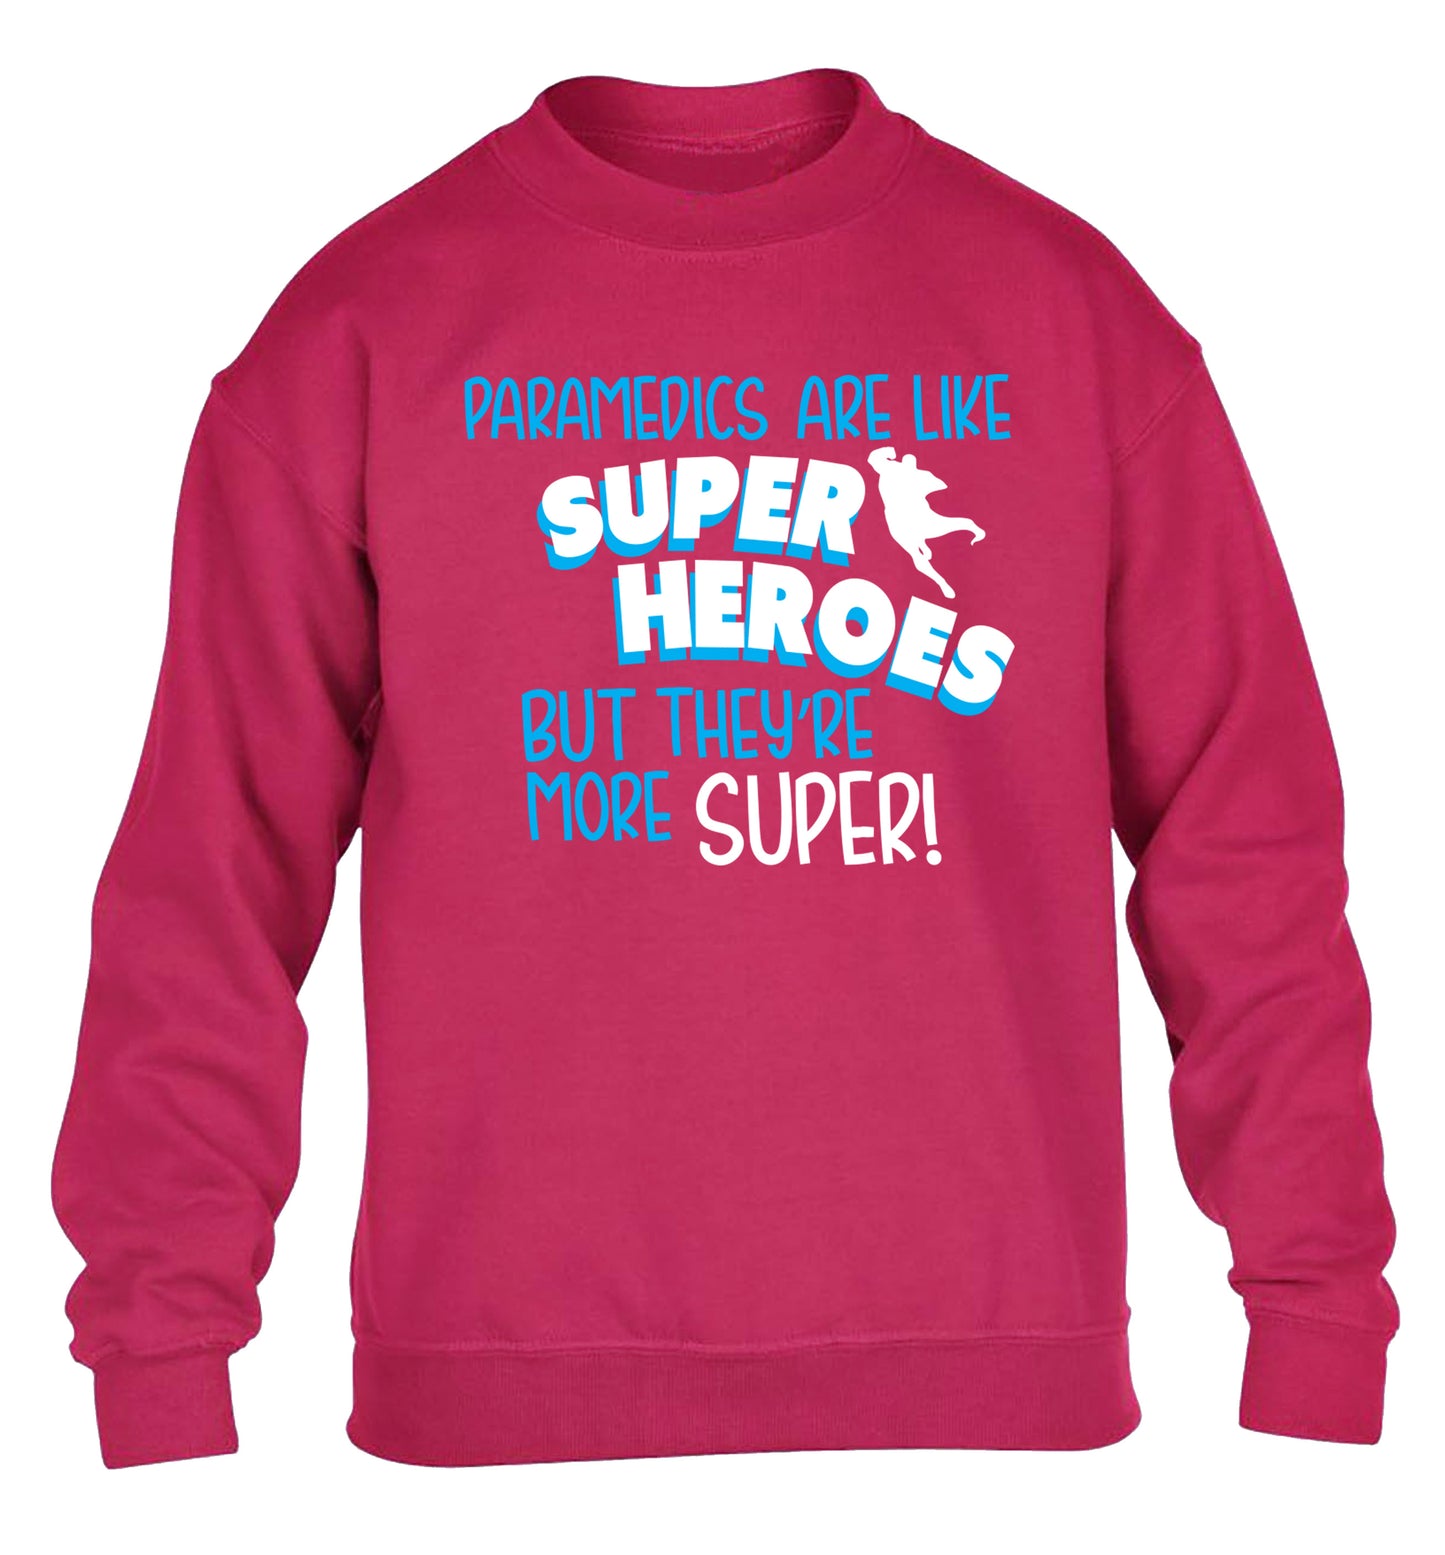 Paramedics are like superheros but they're more super children's pink sweater 12-13 Years